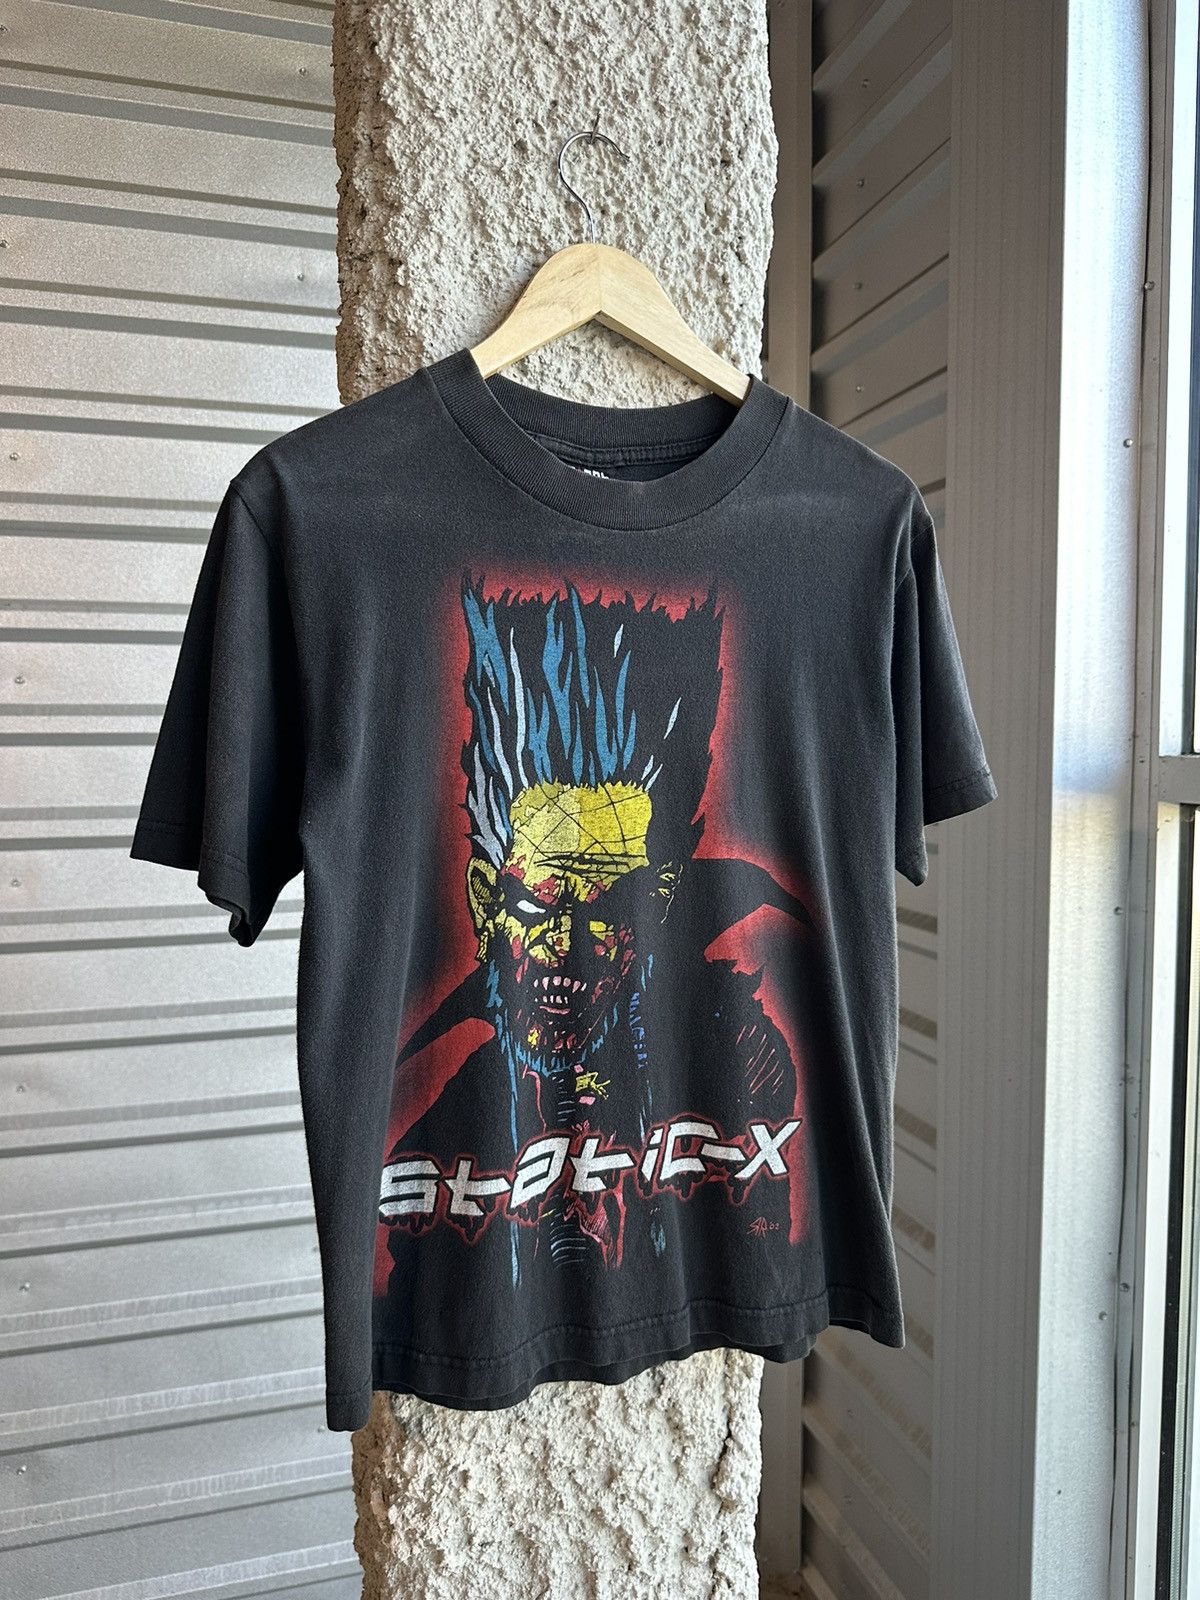 Vintage Vintage Static-X Metal Band Tee Size US S / EU 44-46 / 1 - 1 Preview